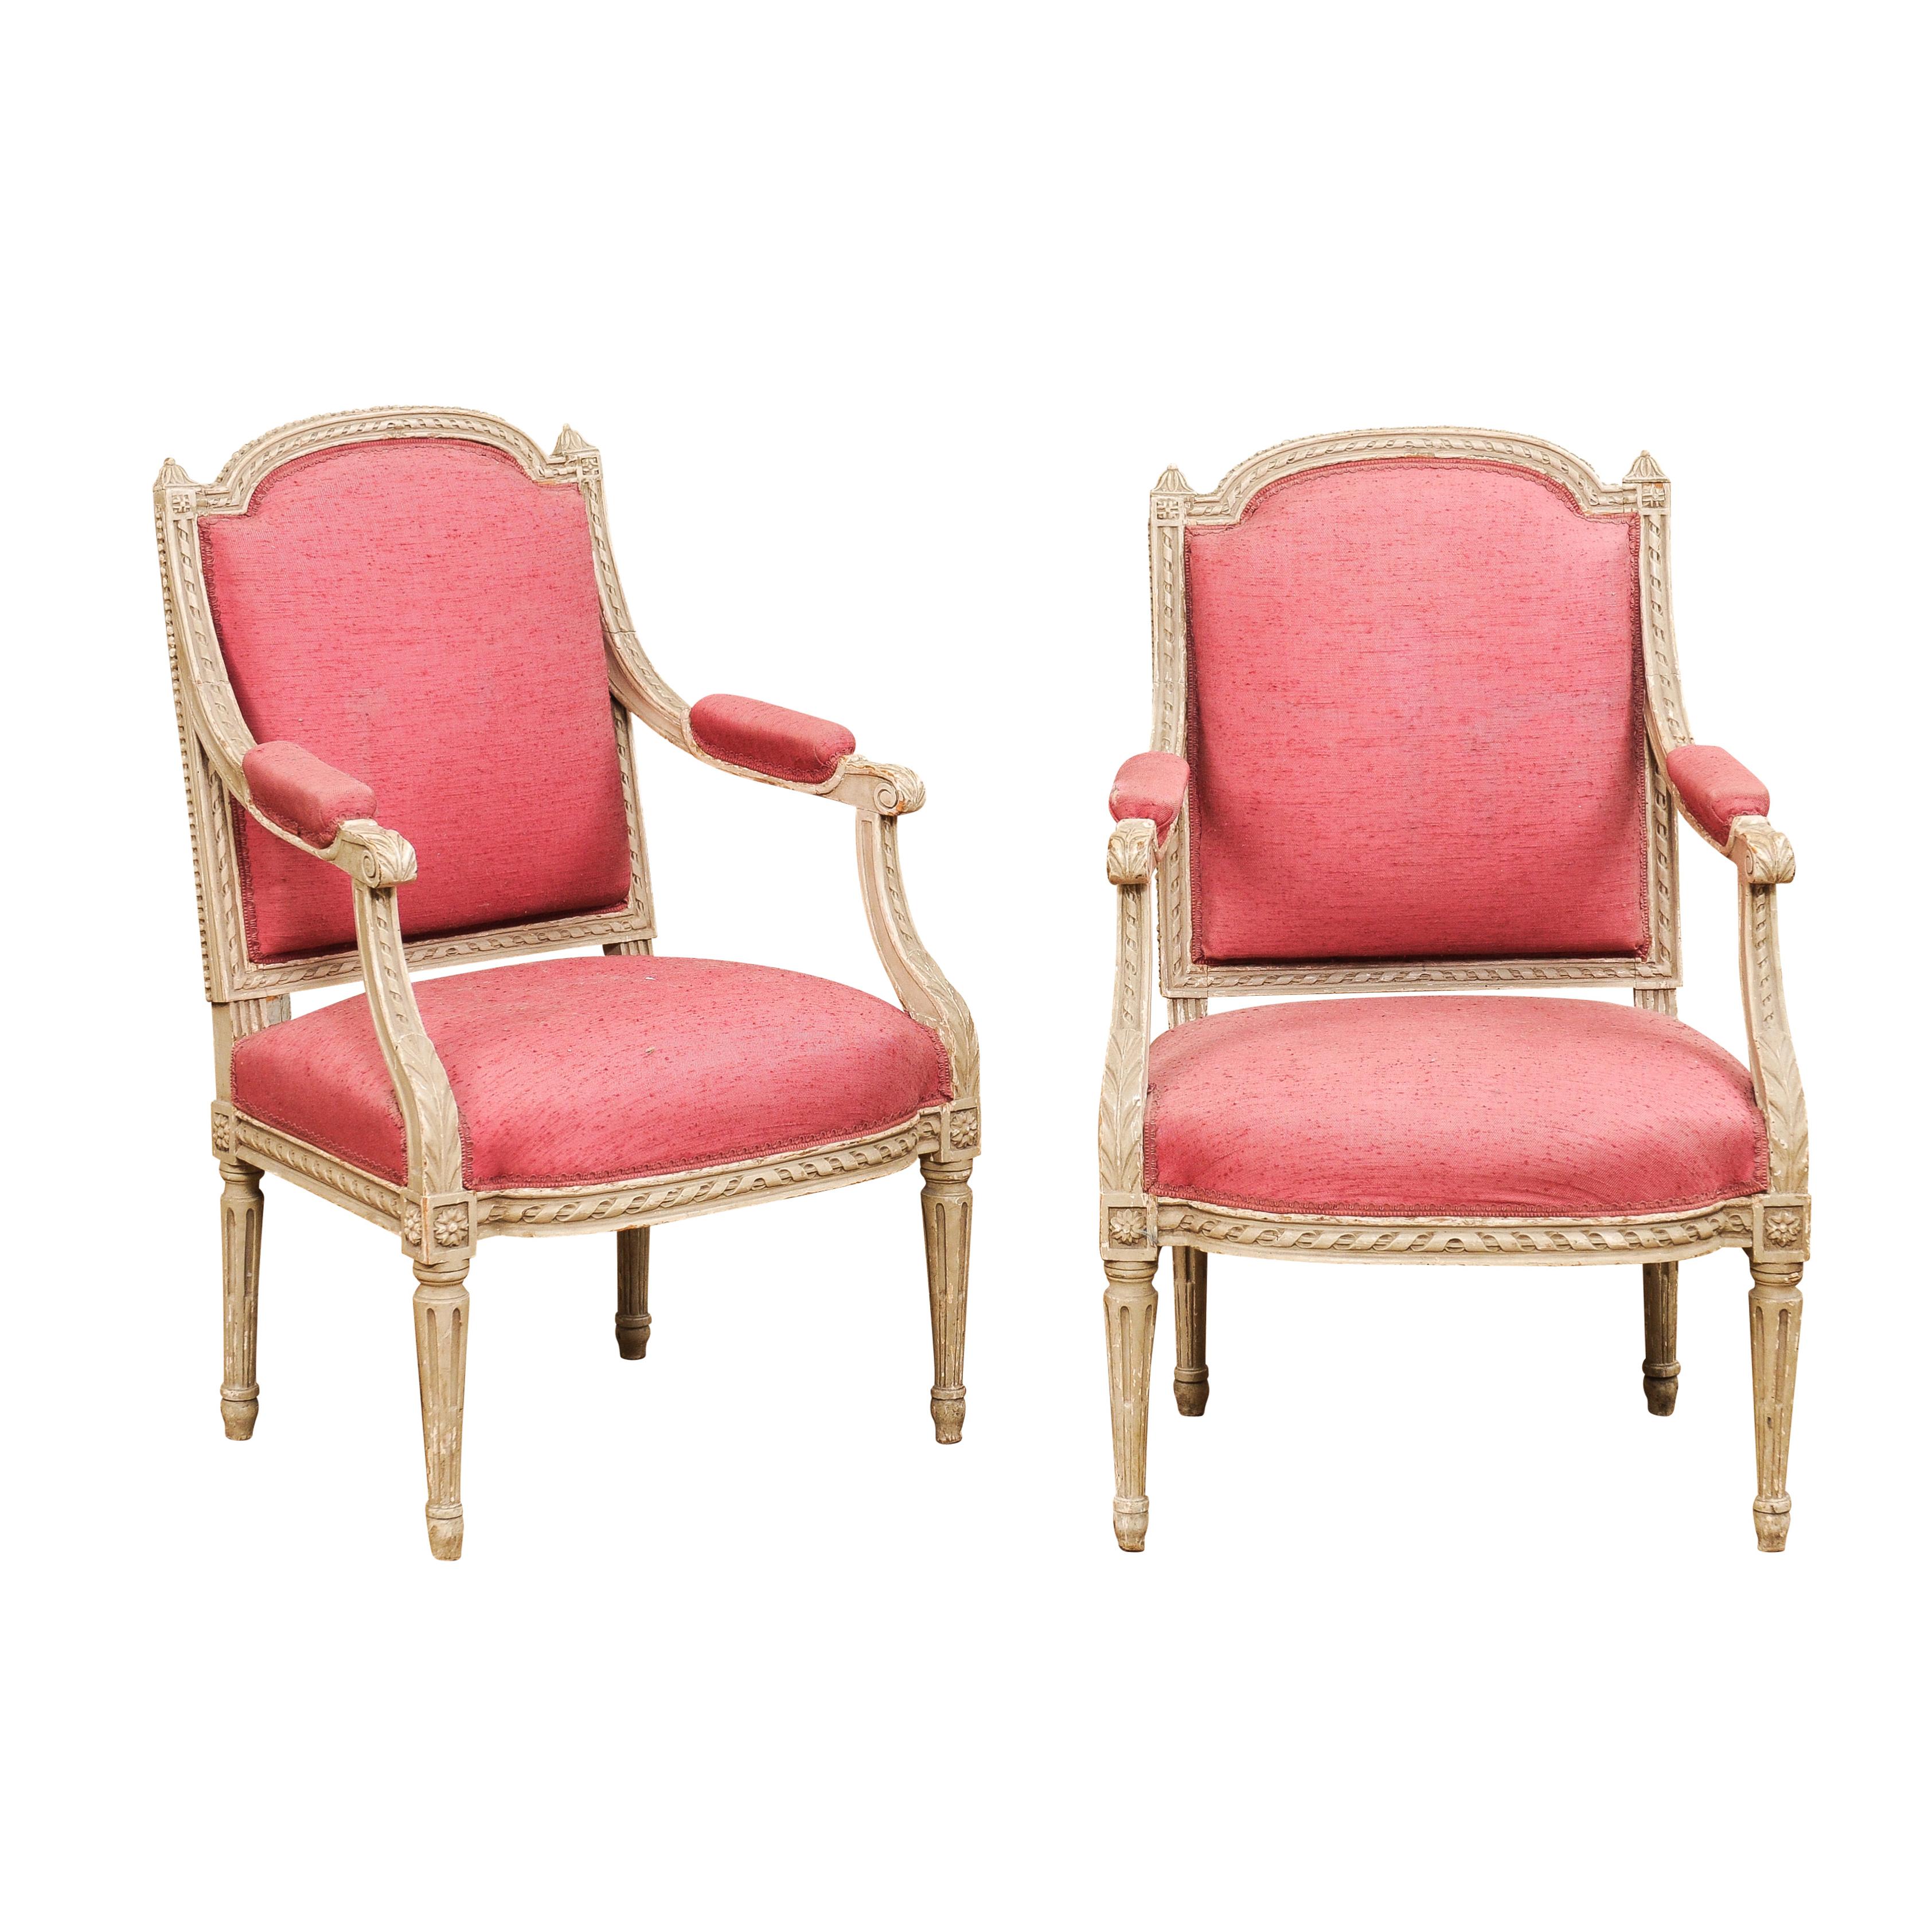 Two French Louis XVI style painted wood armchairs from the 19th century with carved décor including twisted rope motifs, acanthus leaves, rosettes and petite beads. Enhance your living space with the timeless elegance of these two French Louis XVI